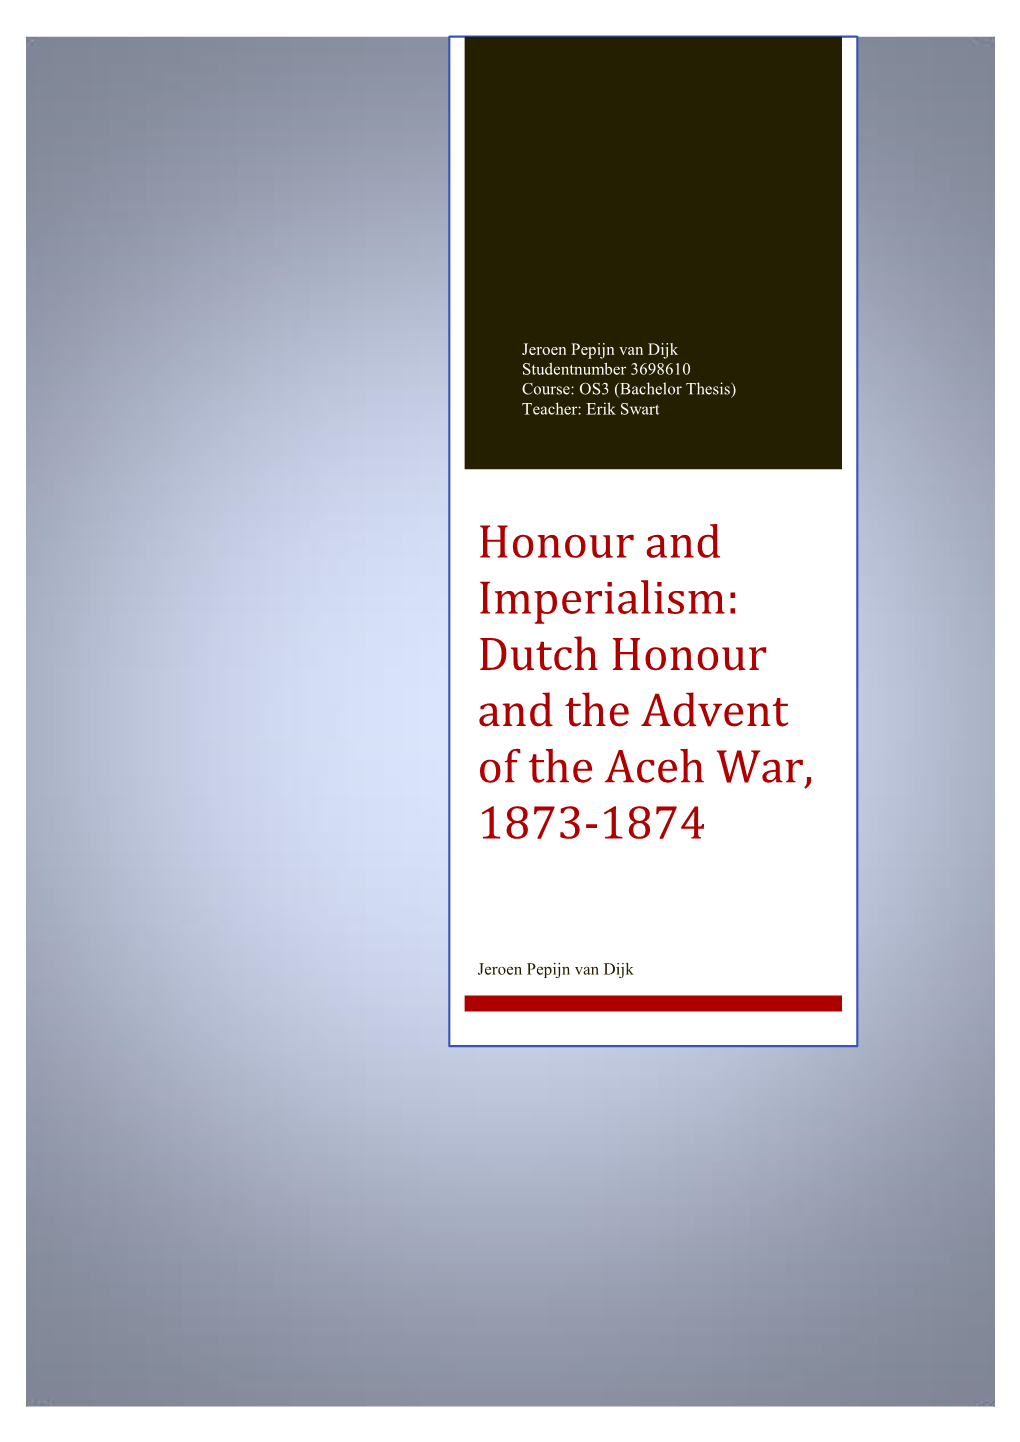 Dutch Honour and the Advent of the Aceh War, 1873-1874